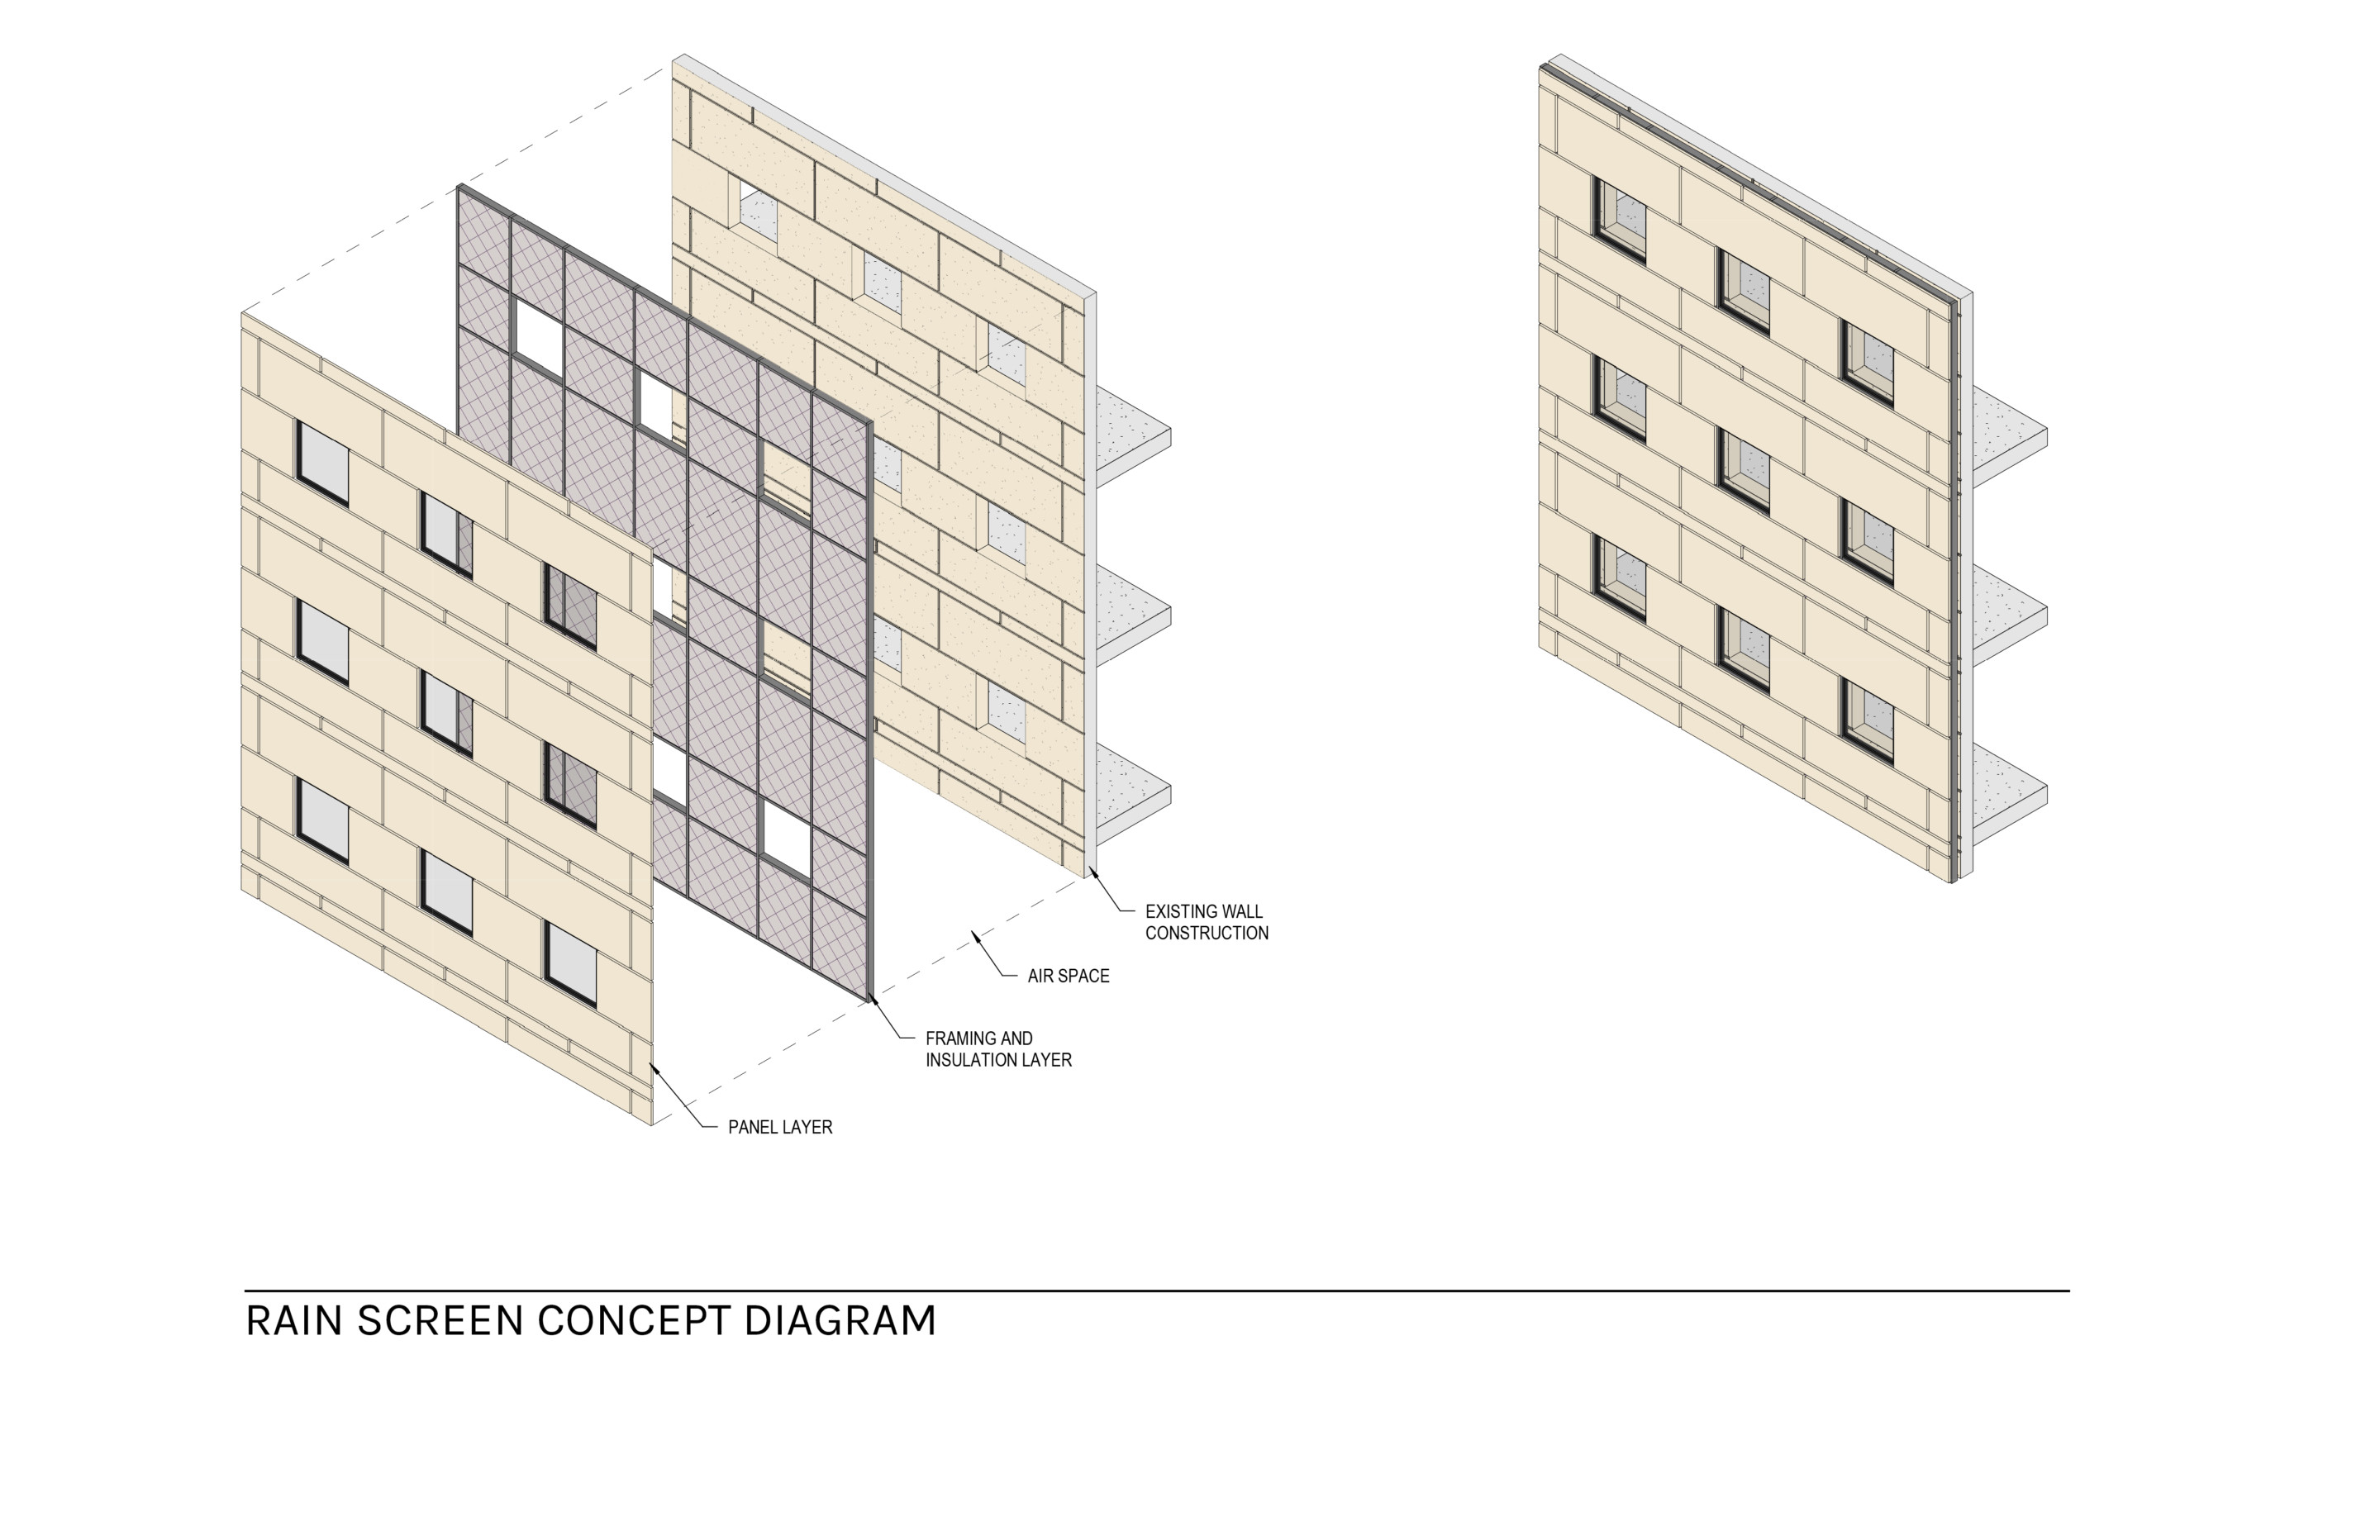 Diagram of the facade system and its over cladding of the existing volume